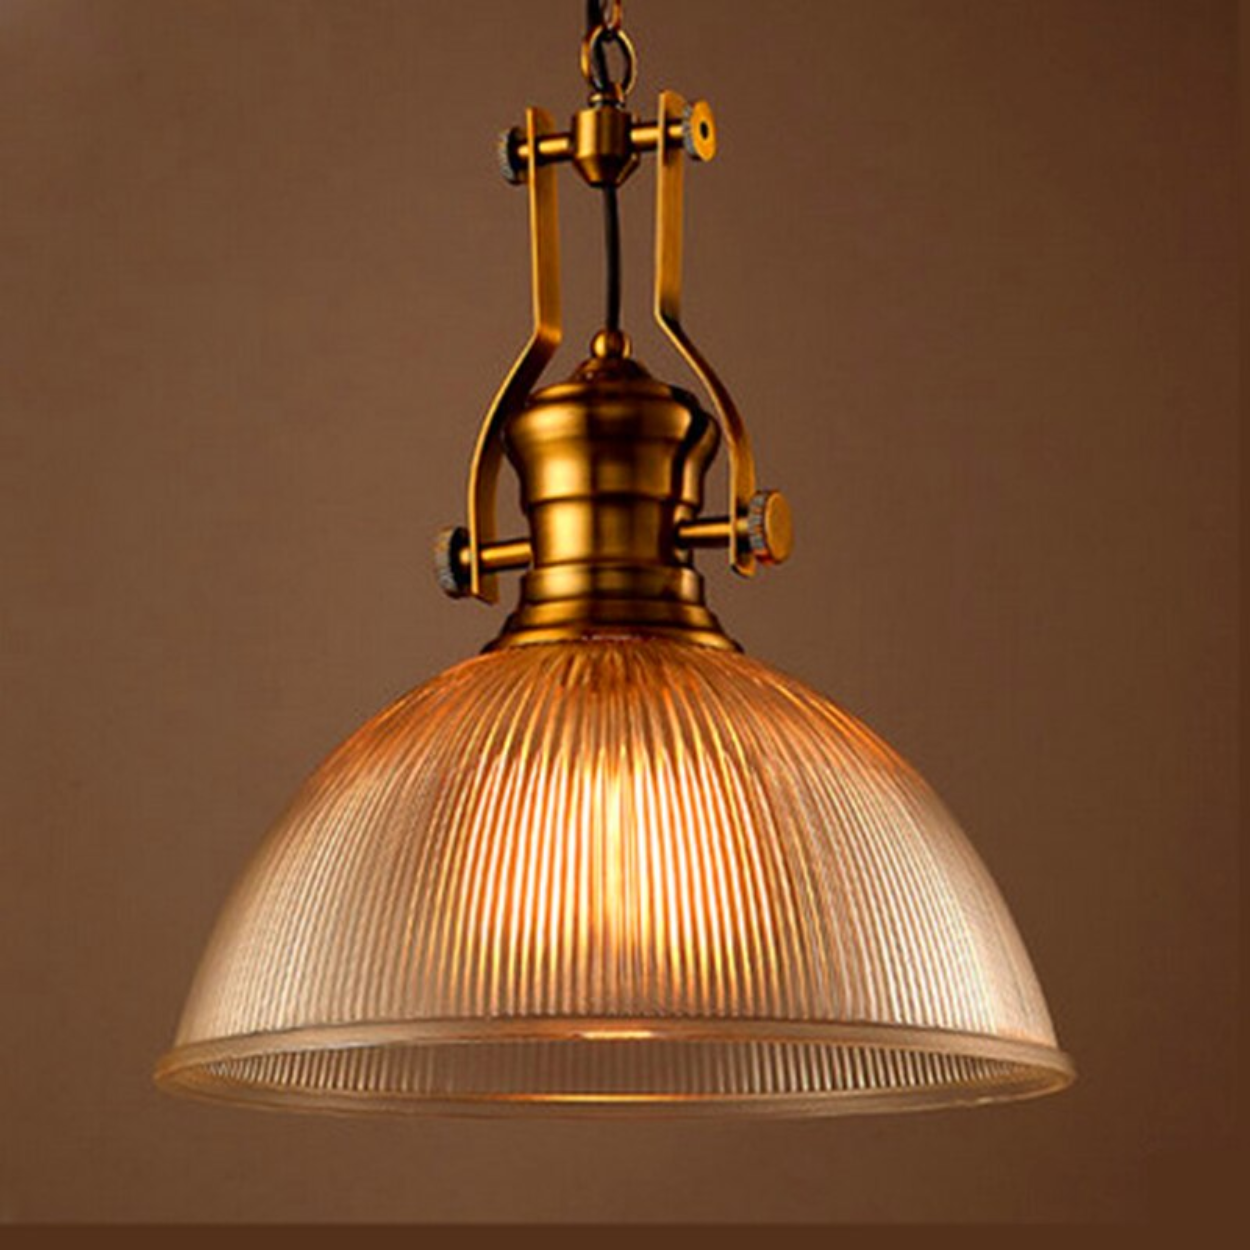 ANKUR QUEST VINTAGE STYLE METAL AND GLASS HANGING LIGHT - Ankur Lighting